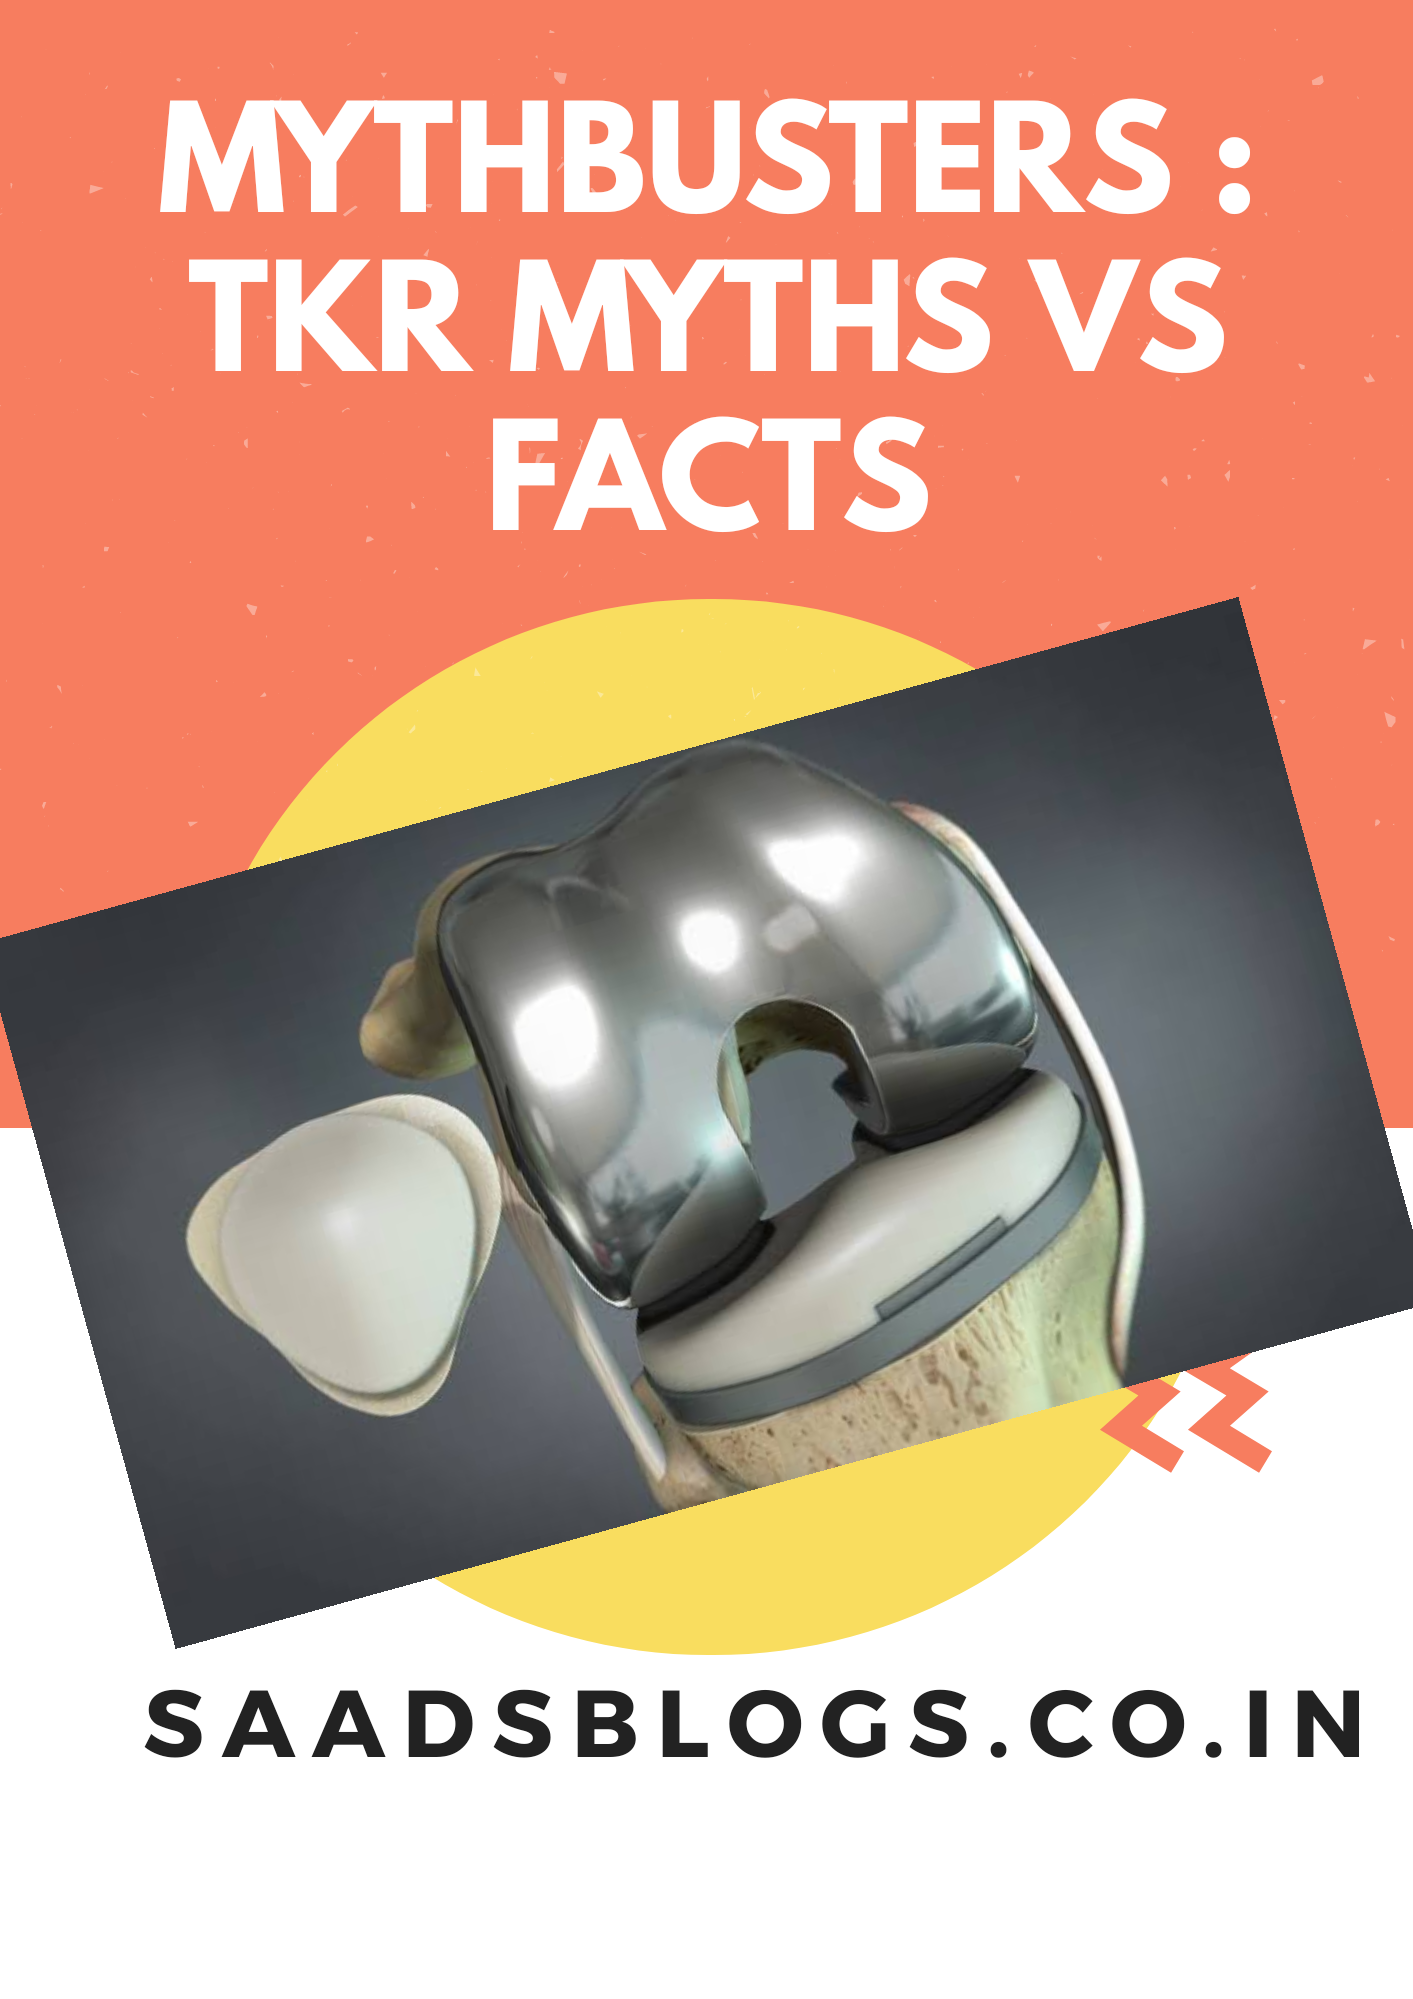 Myth busters part -2 : Total Knee Replacement Myths vs facts.